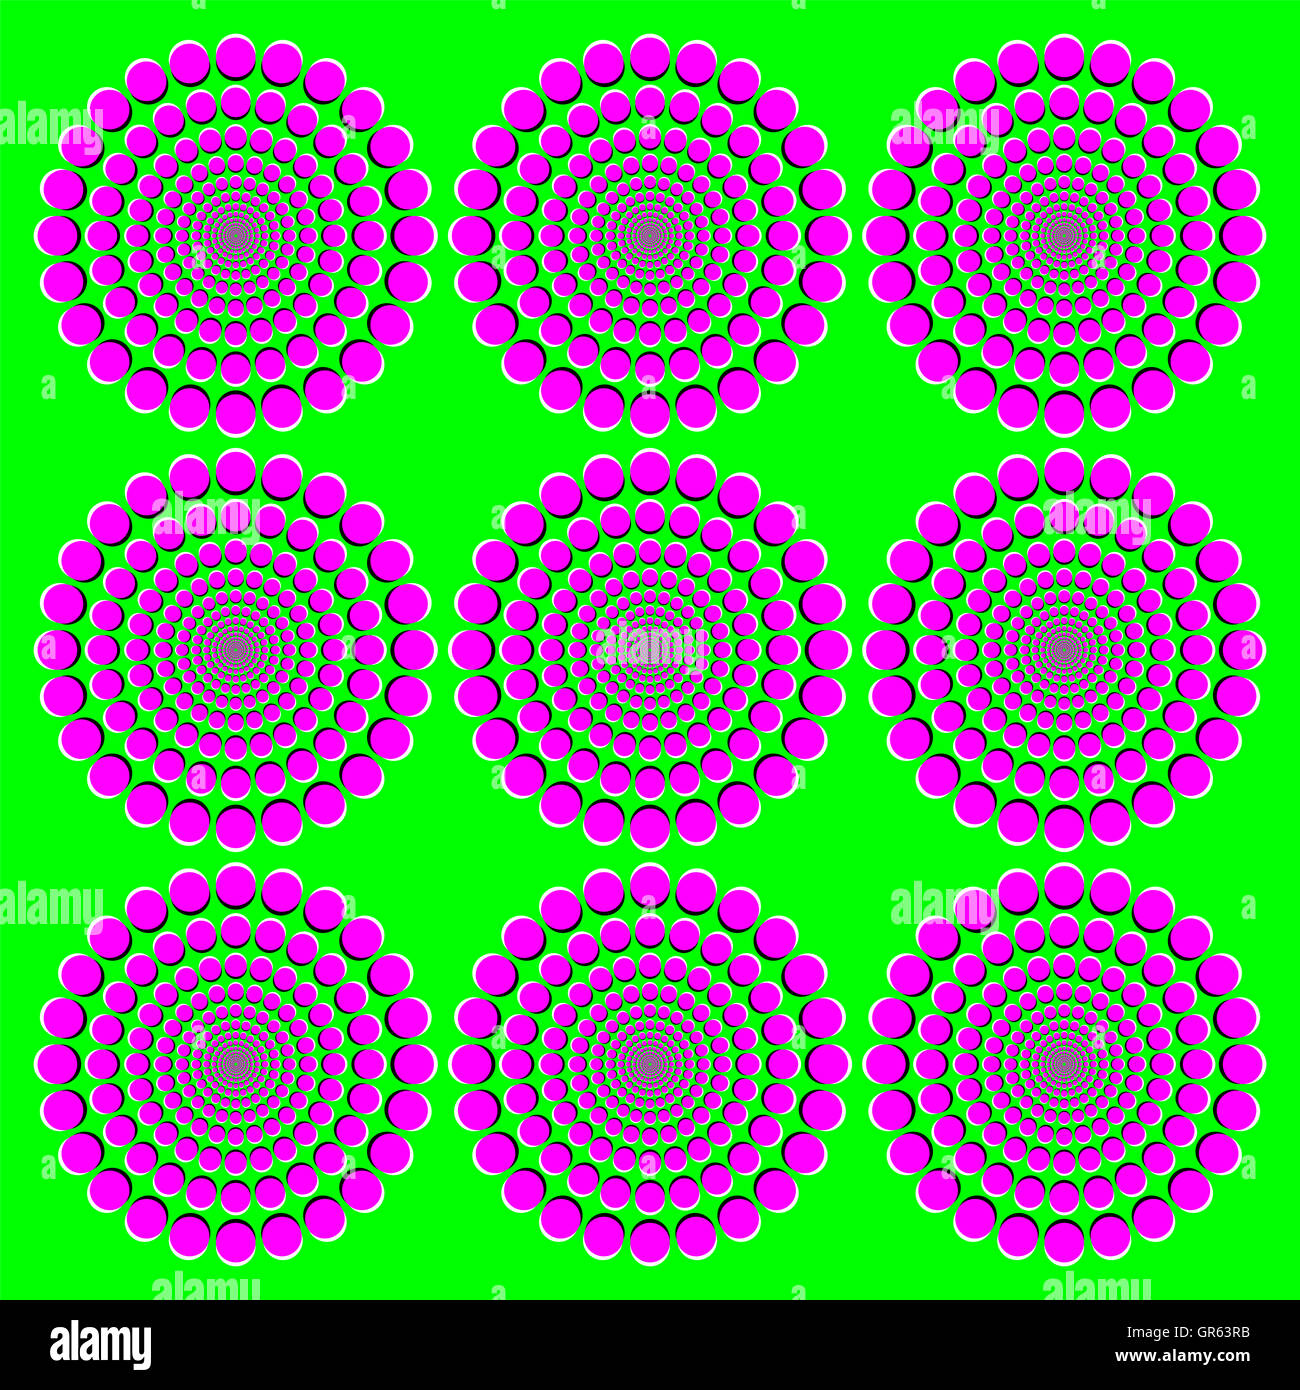 Blooming pink wheels motion illusion. It seems the wheels with magenta dots on green background become bigger when moving eyes. Stock Photo